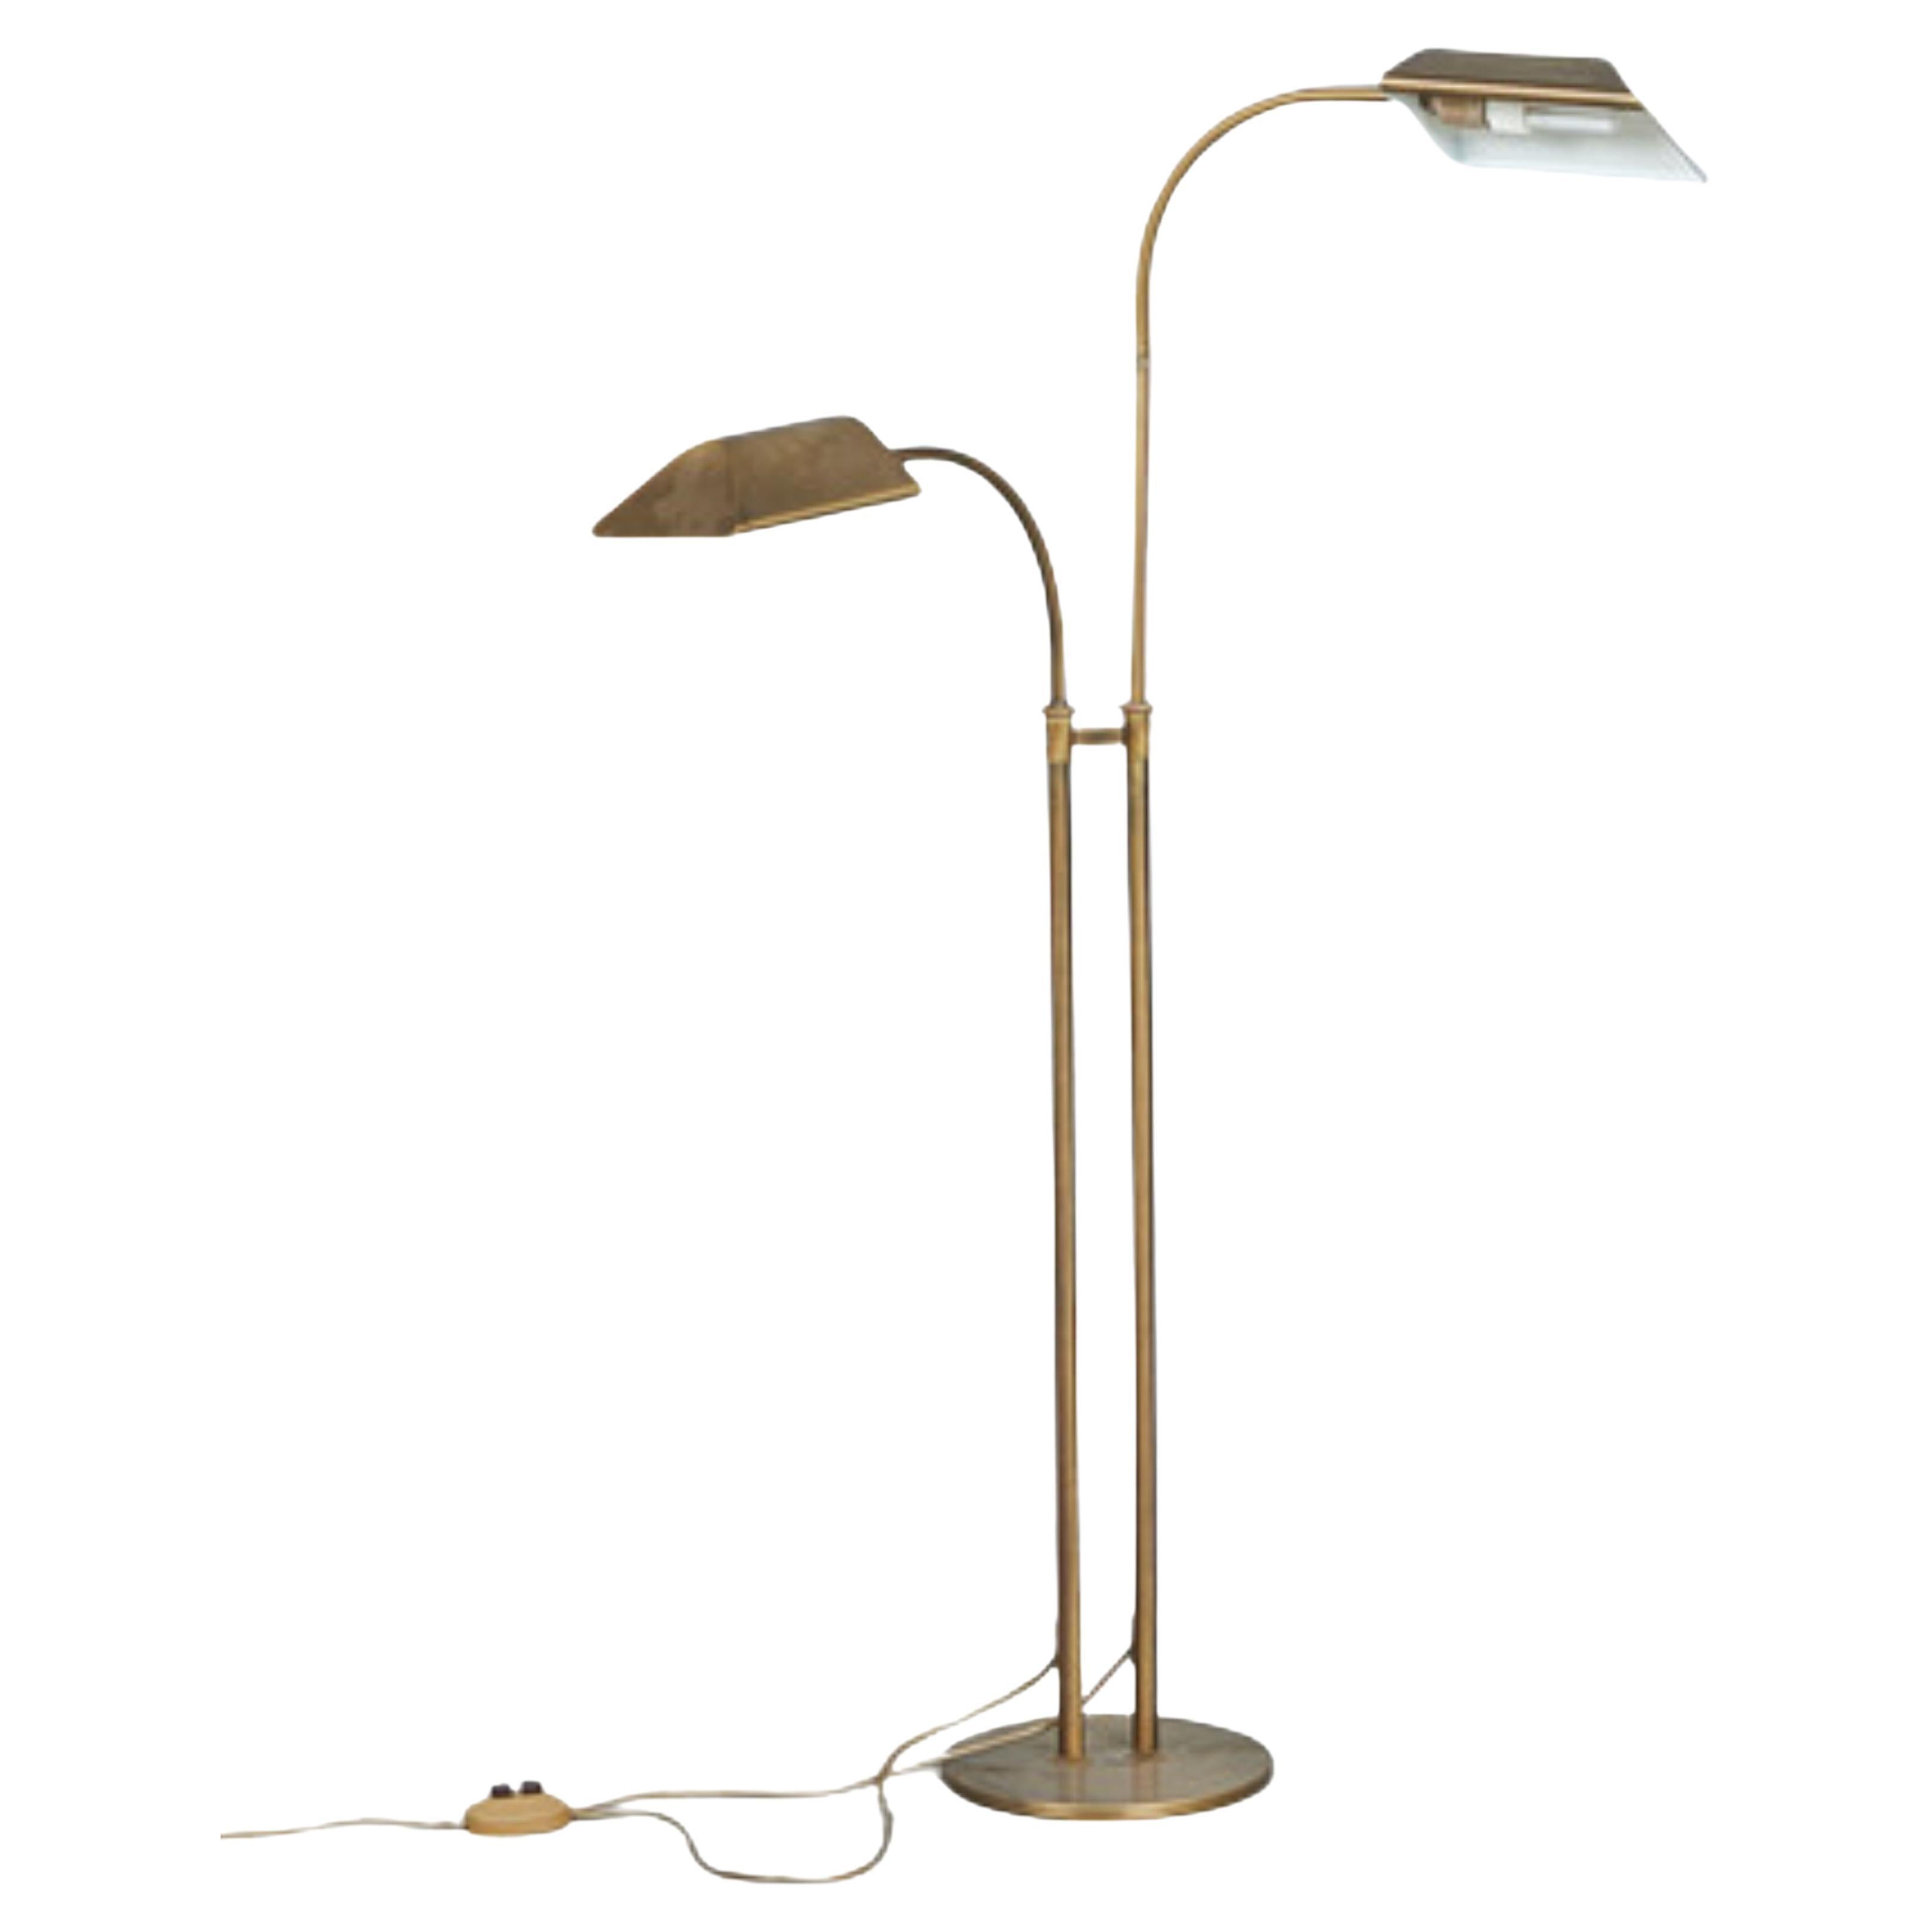 This 1970s floor lamp is an elegant and functional piece, crafted from brass with a sleek and modern design. It features two curved arms and a round base. The lamp also boasts two rectangular lamp heads that can be easily swiveled to direct the